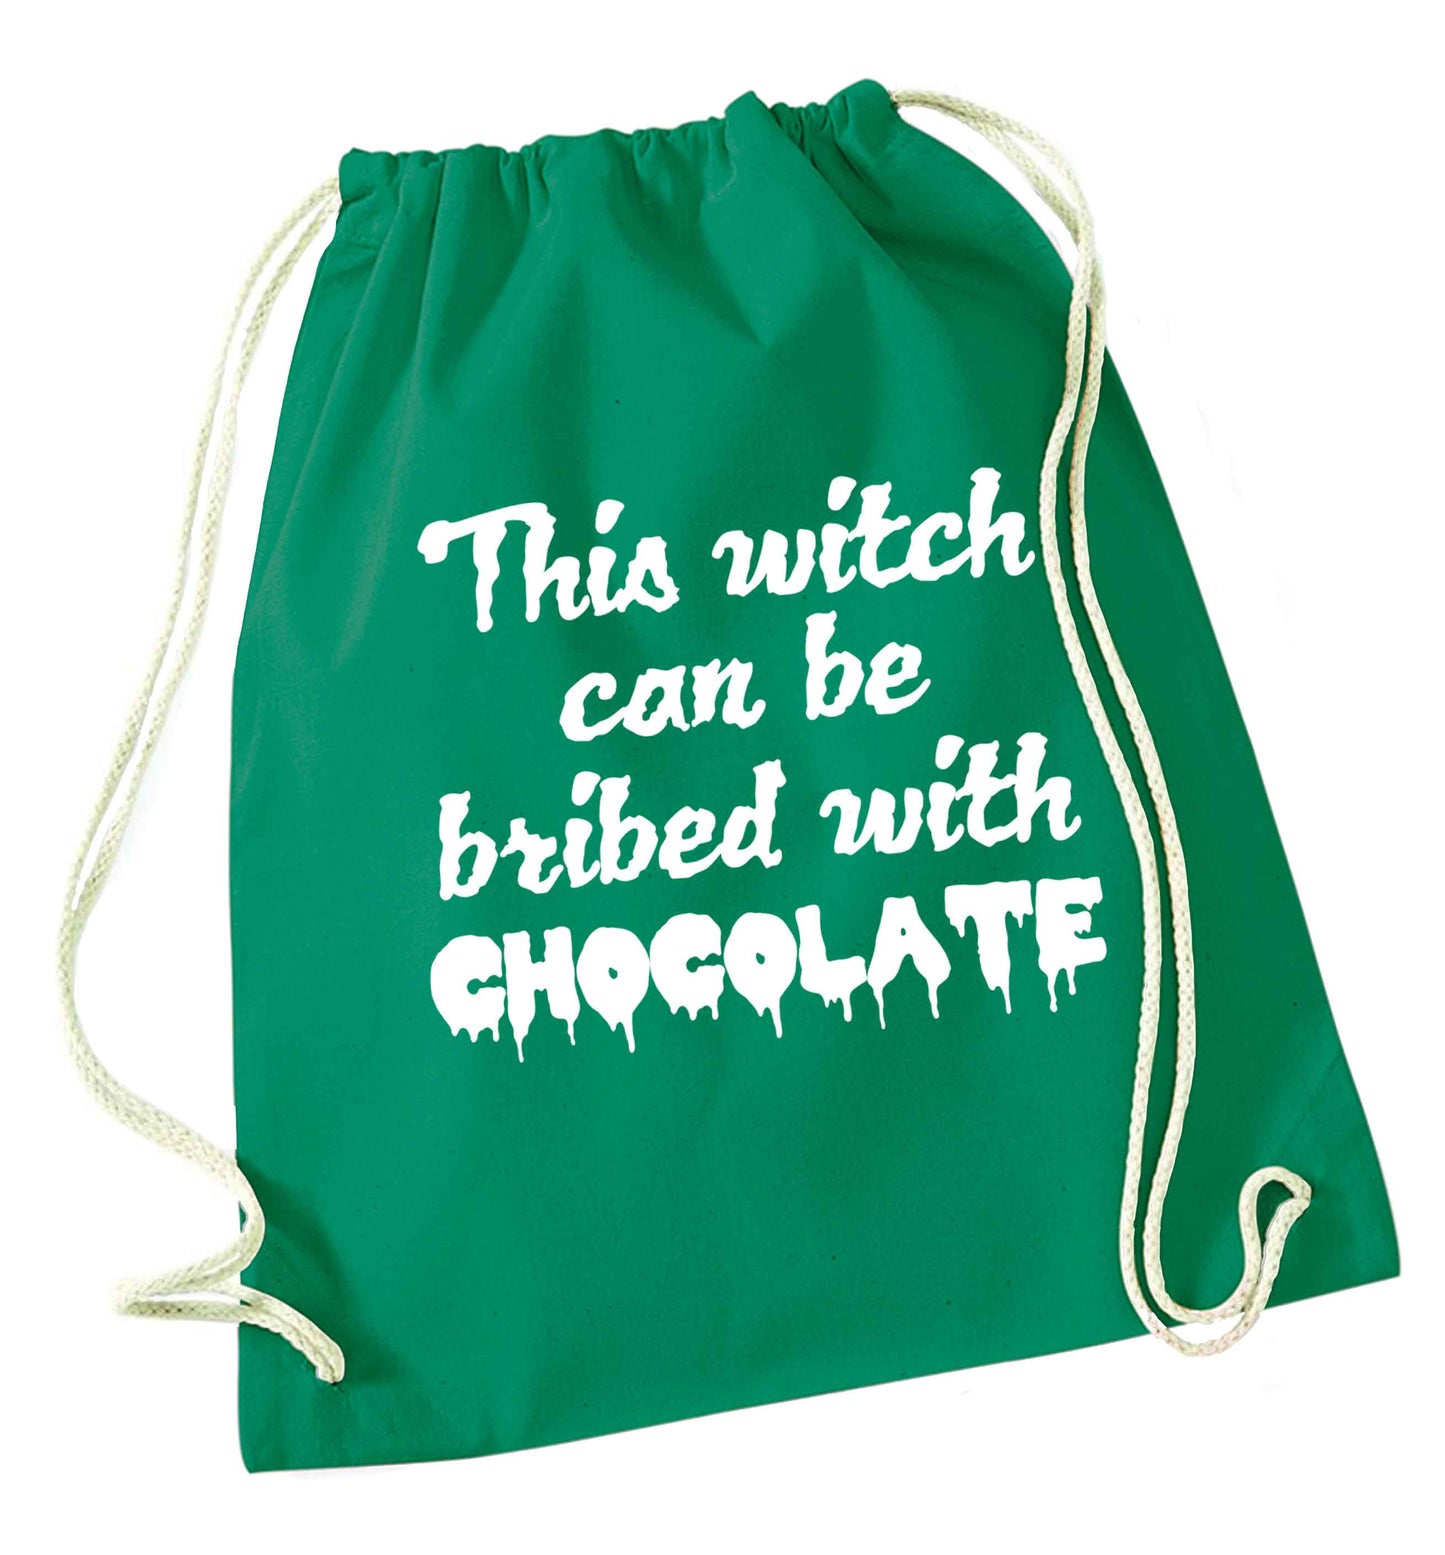 This witch can be bribed with chocolate green drawstring bag